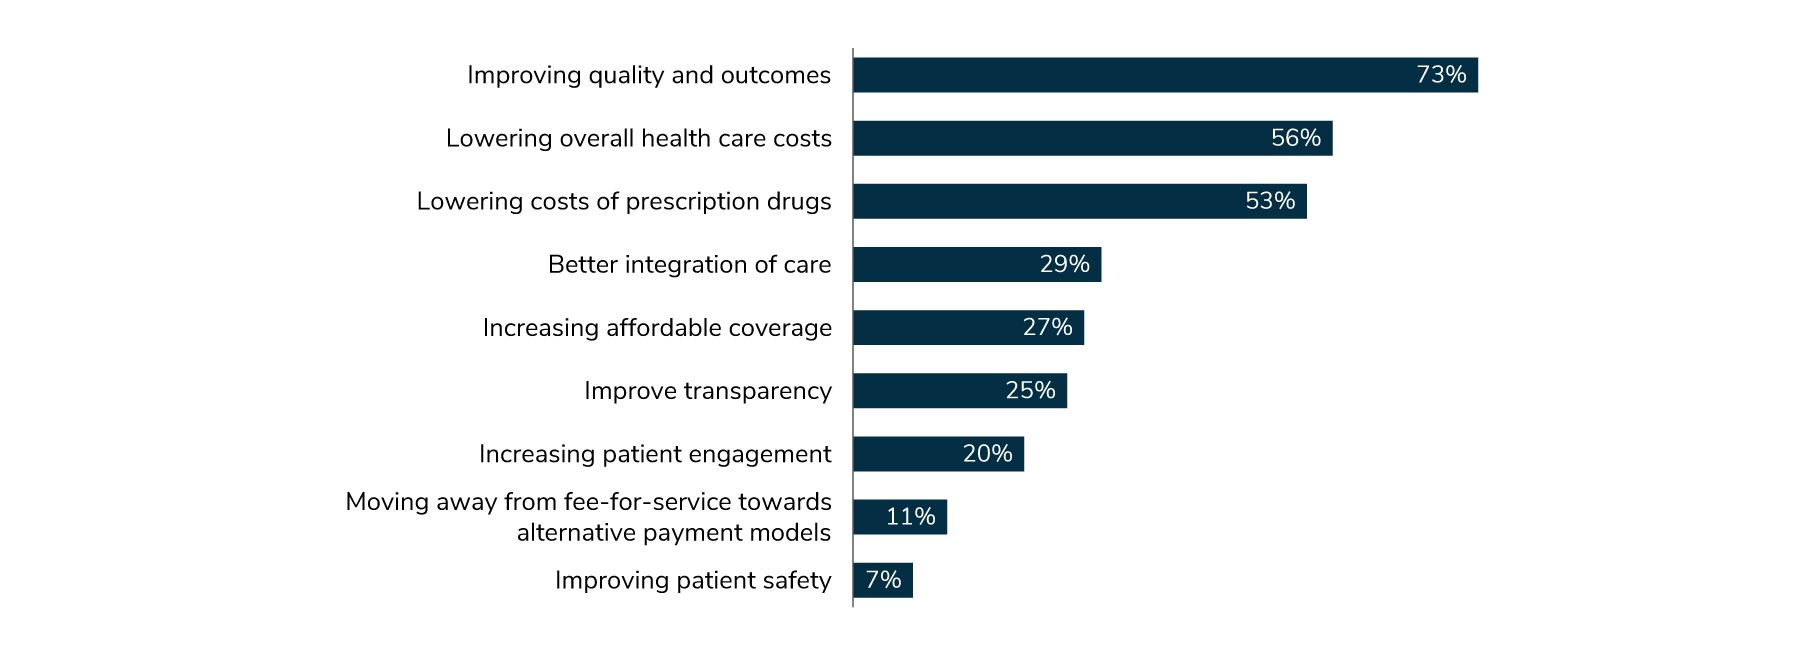 Employers' top objectives for health reform are improving quality and outcomes (73%), lowering health care costs (56%), lowering costs of prescription drugs (53%) and better integration of care (29%).